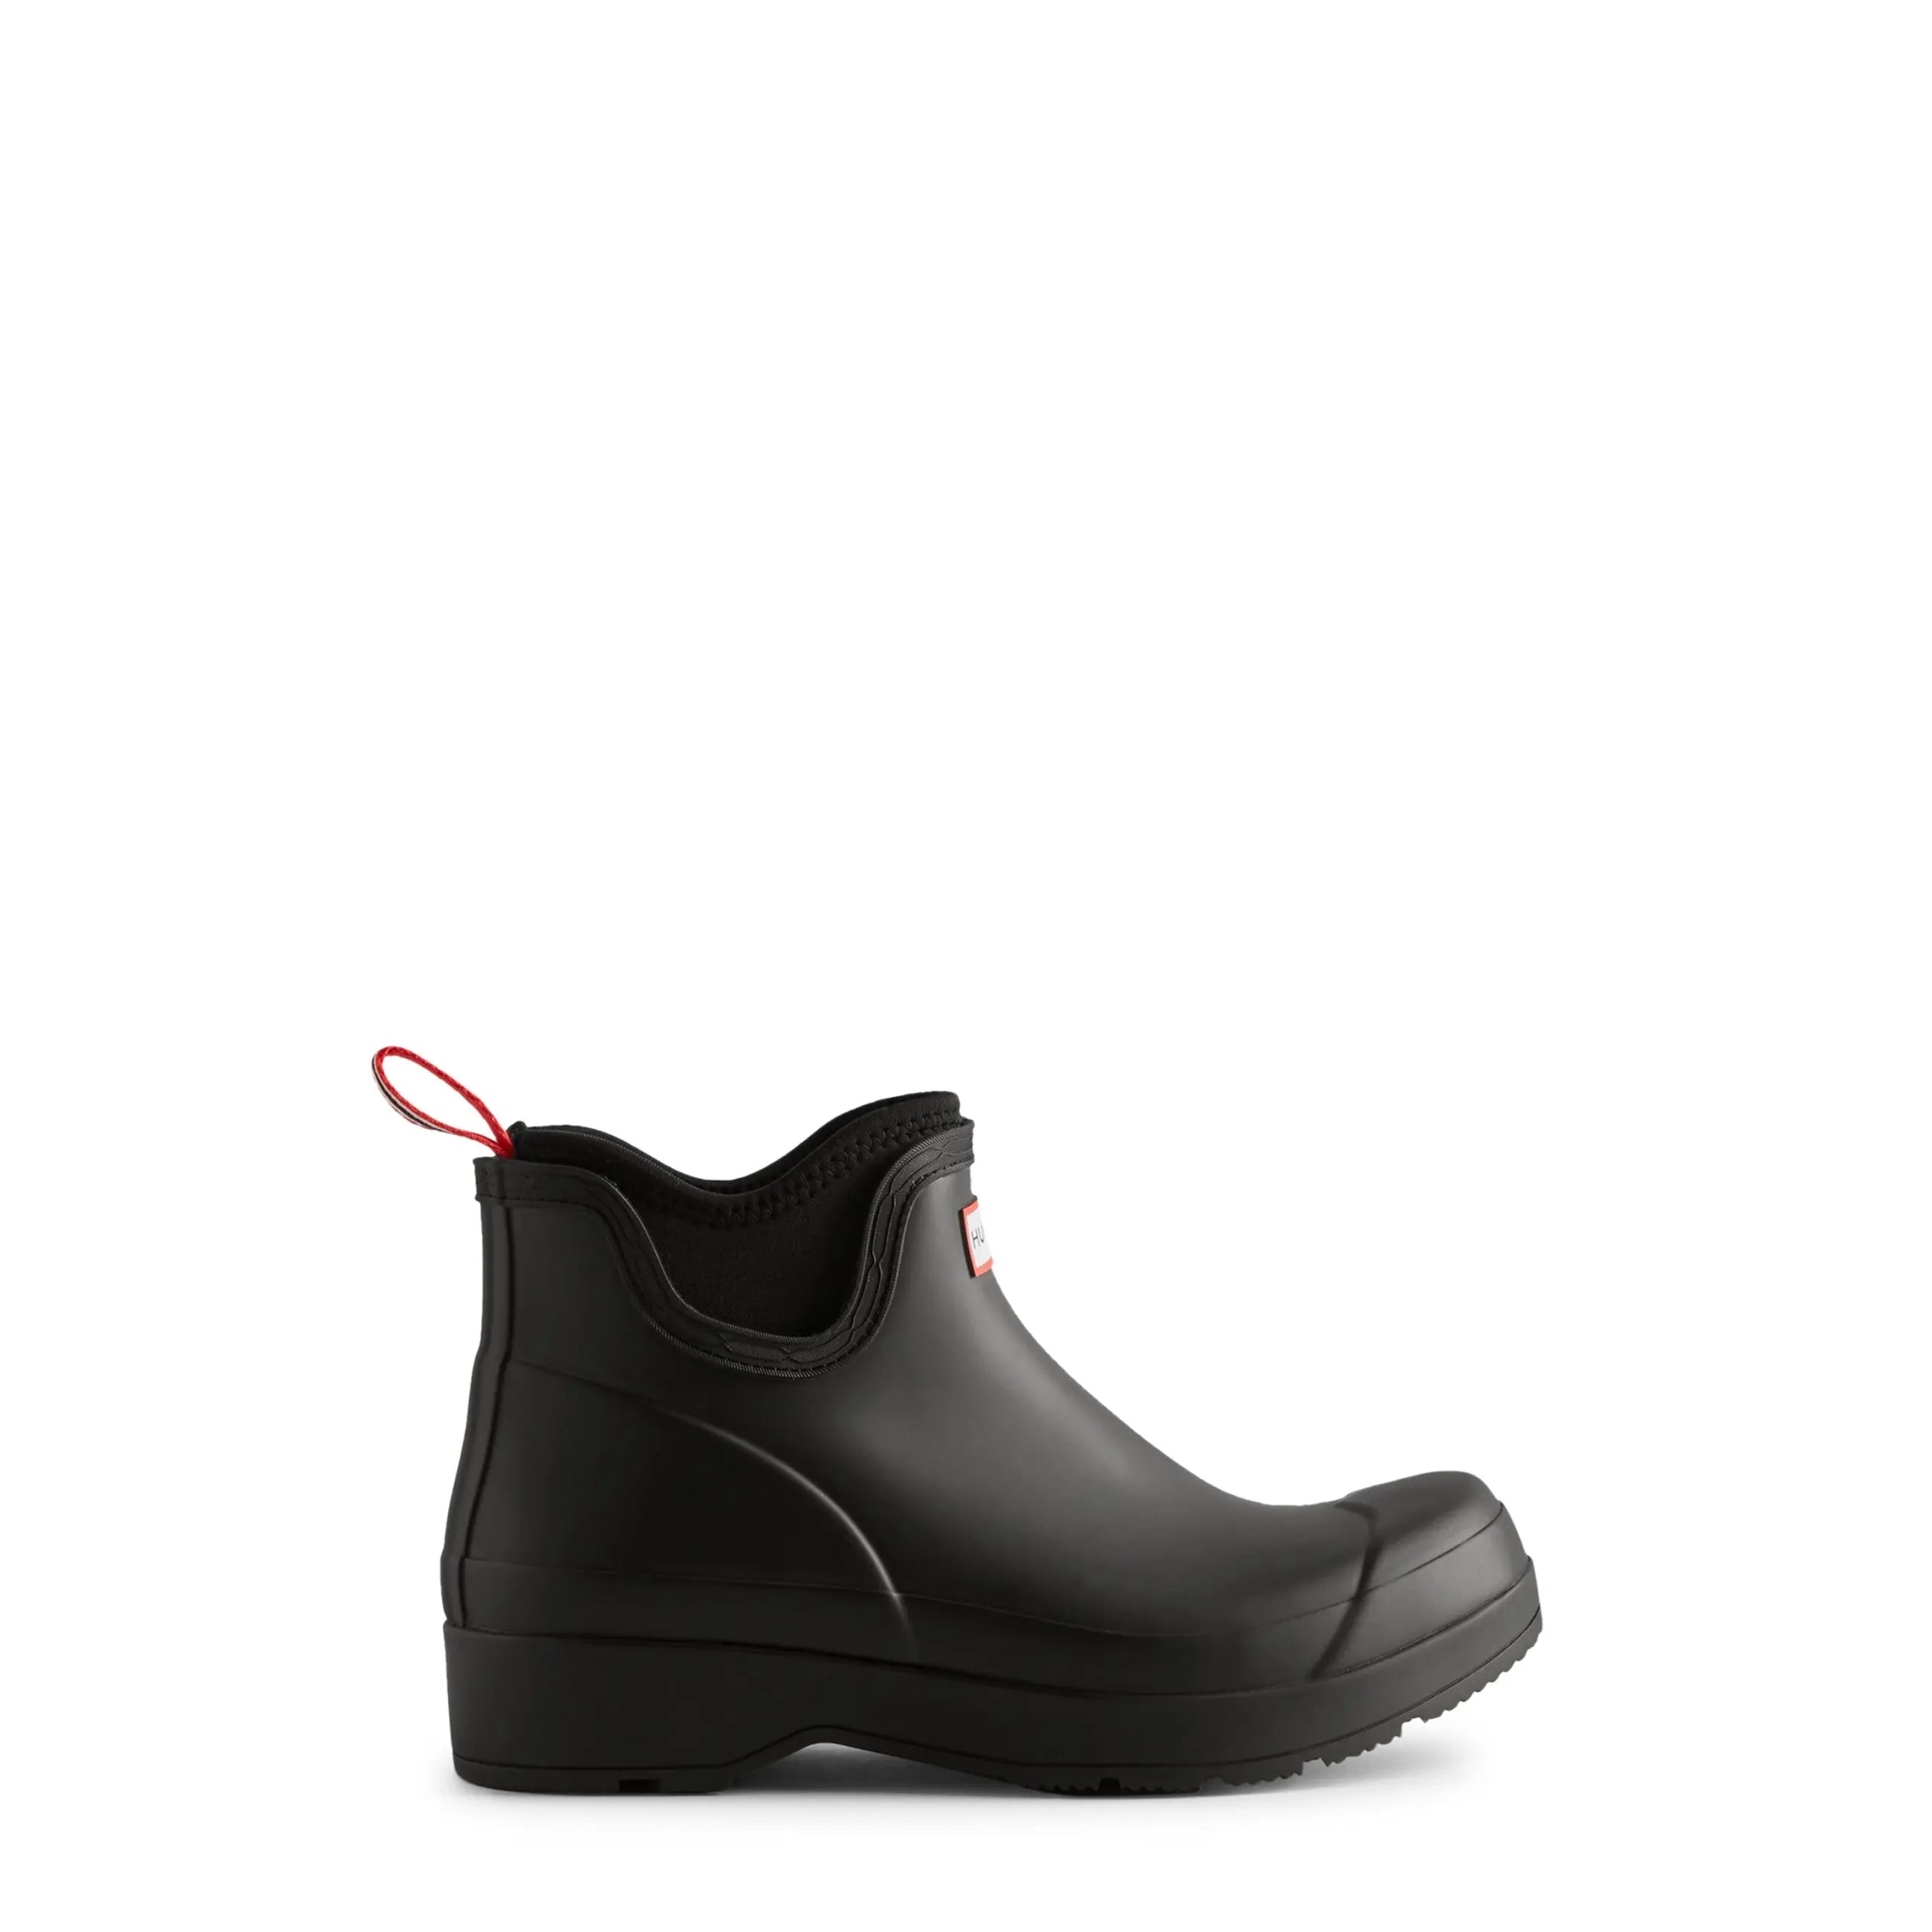 Men's PLAY™ Neoprene Rain Boots - Hunter Boots Men's PLAY™ Neoprene Rain Boots Black Hunter Boots Men's > Ankle Boots > Play Boots